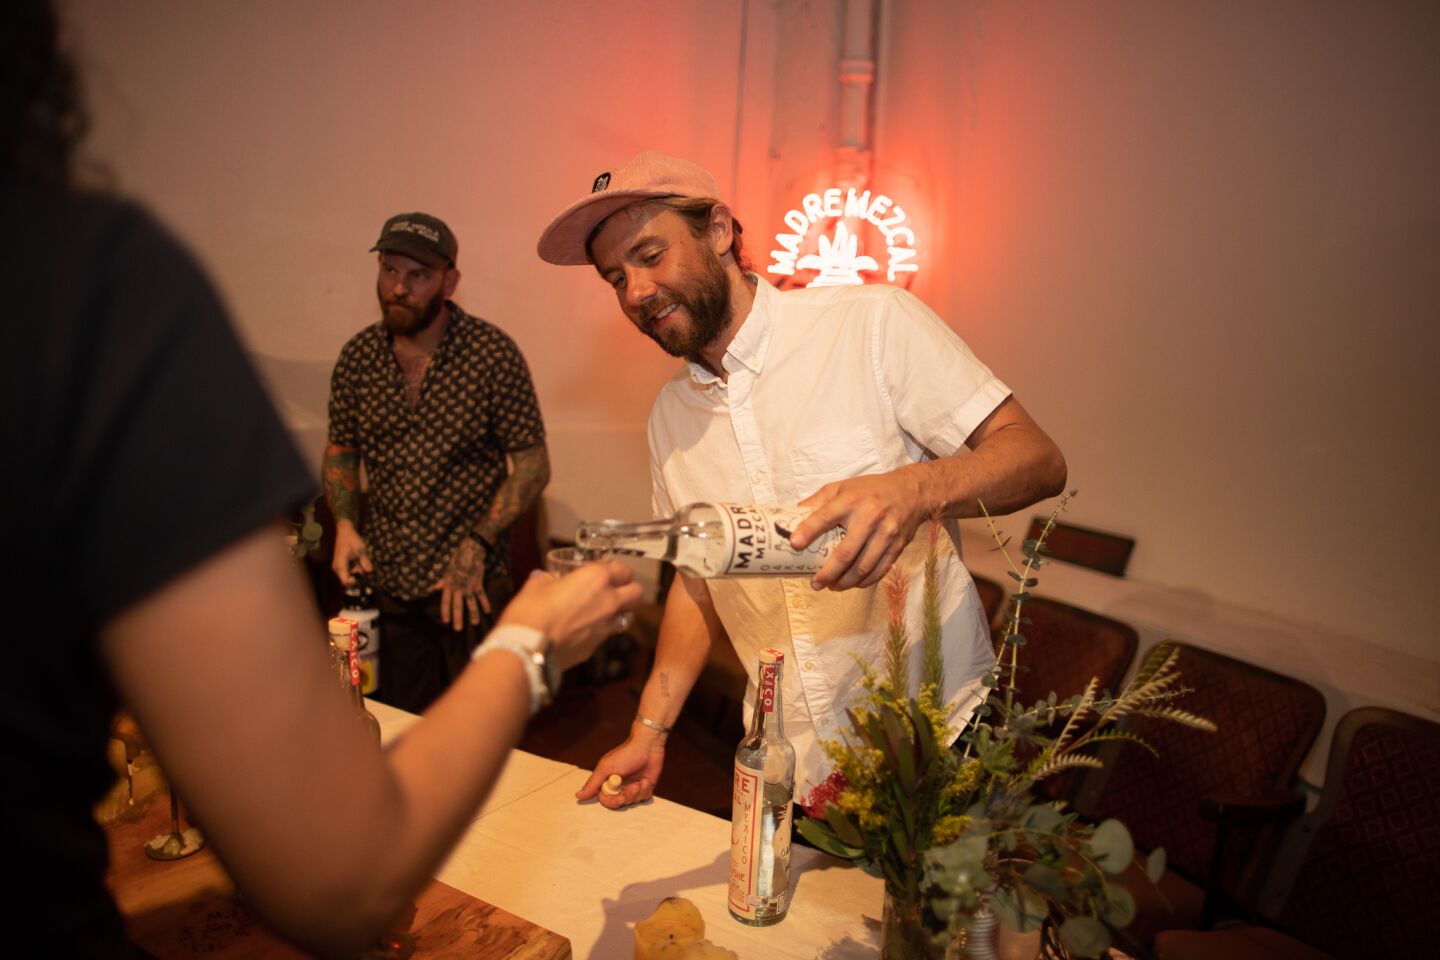 San Diegans headed to Mexico in a Bottle, a series of parties billed as "North America's biggest, and baddest, mezcal tastings," on Sunday, Oct. 3, 2021 at Bread & Salt gallery.